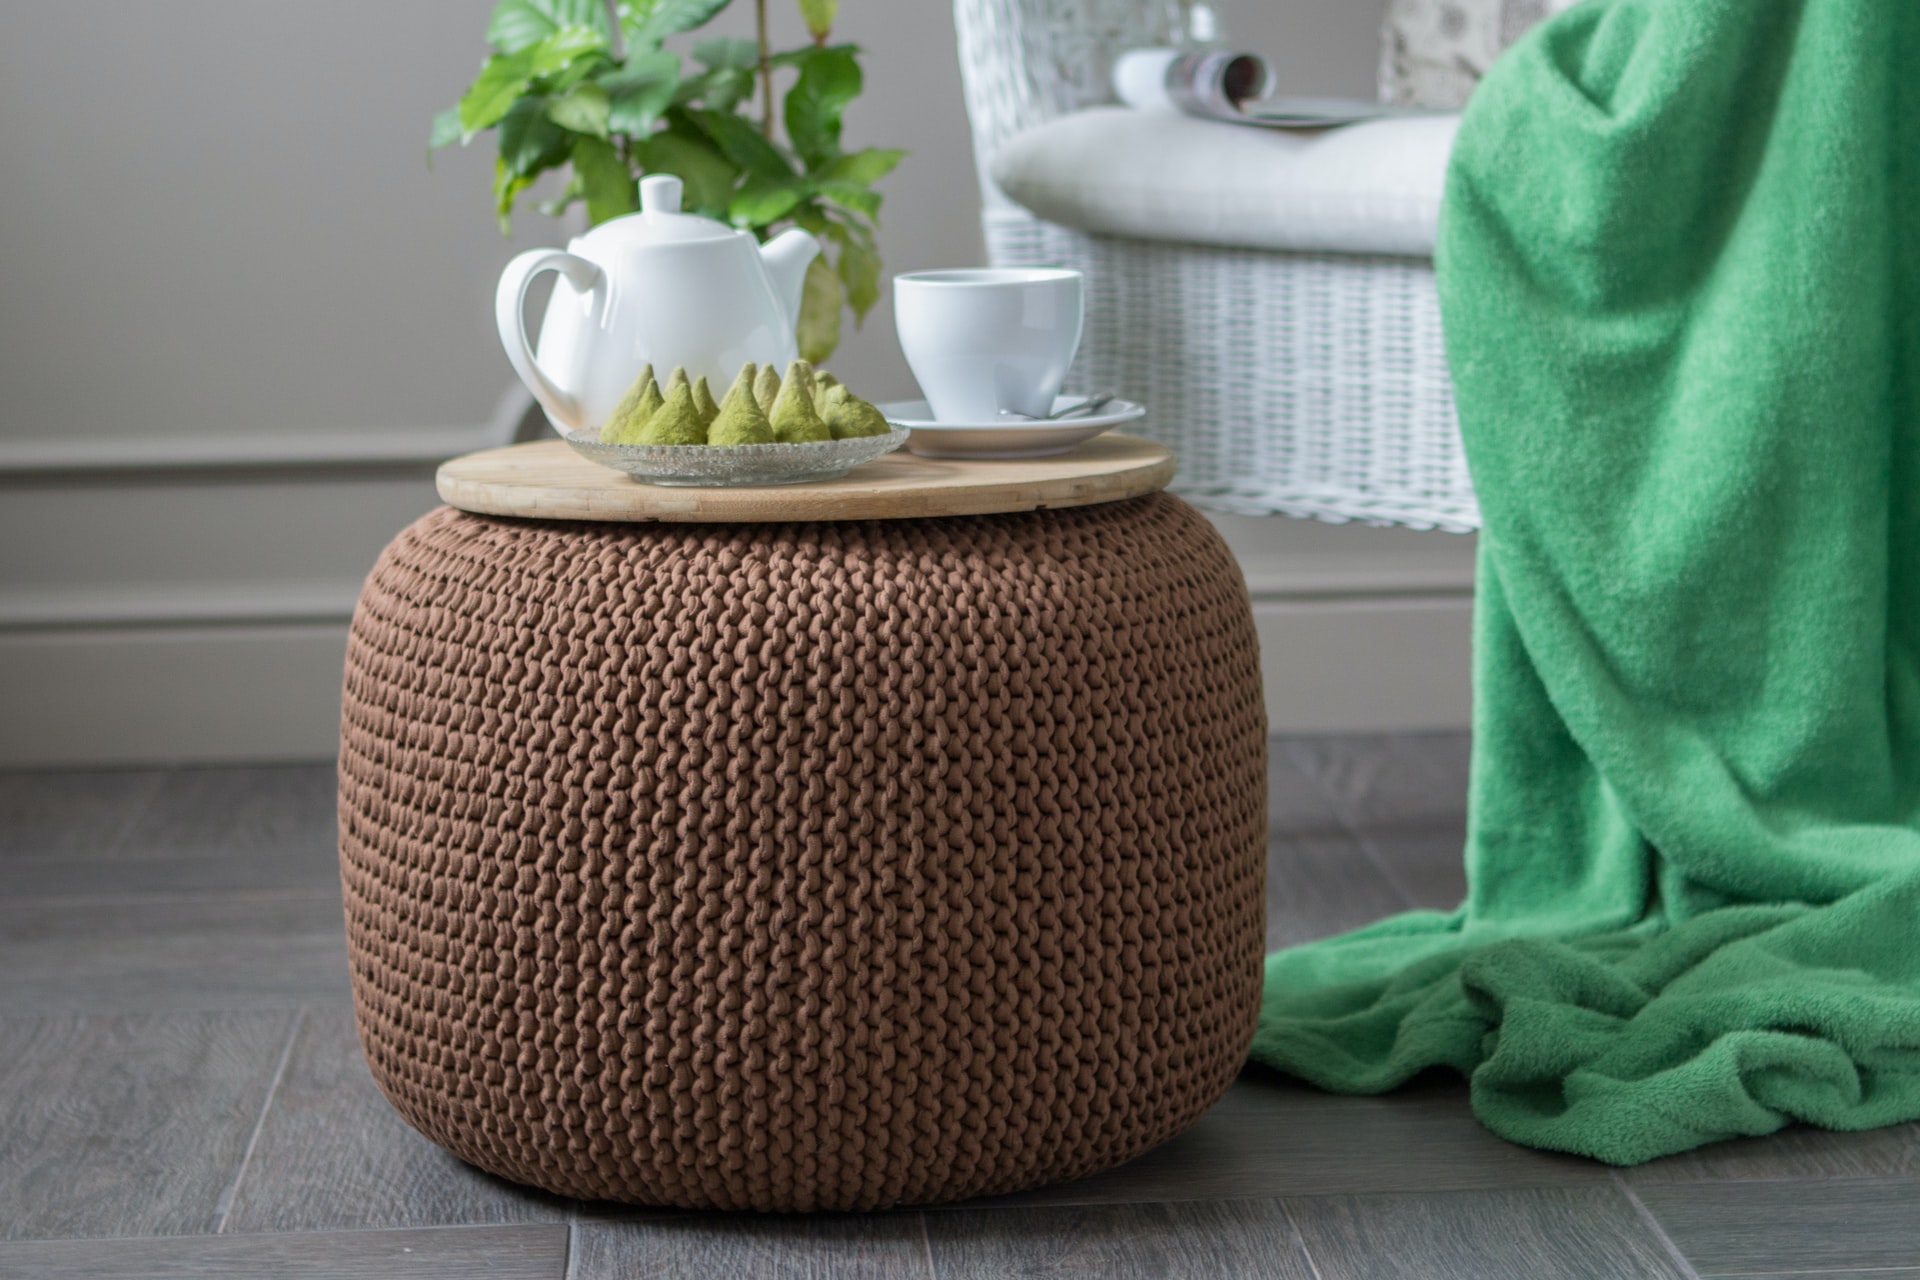 A pouffe different from all others – see designer suggestions